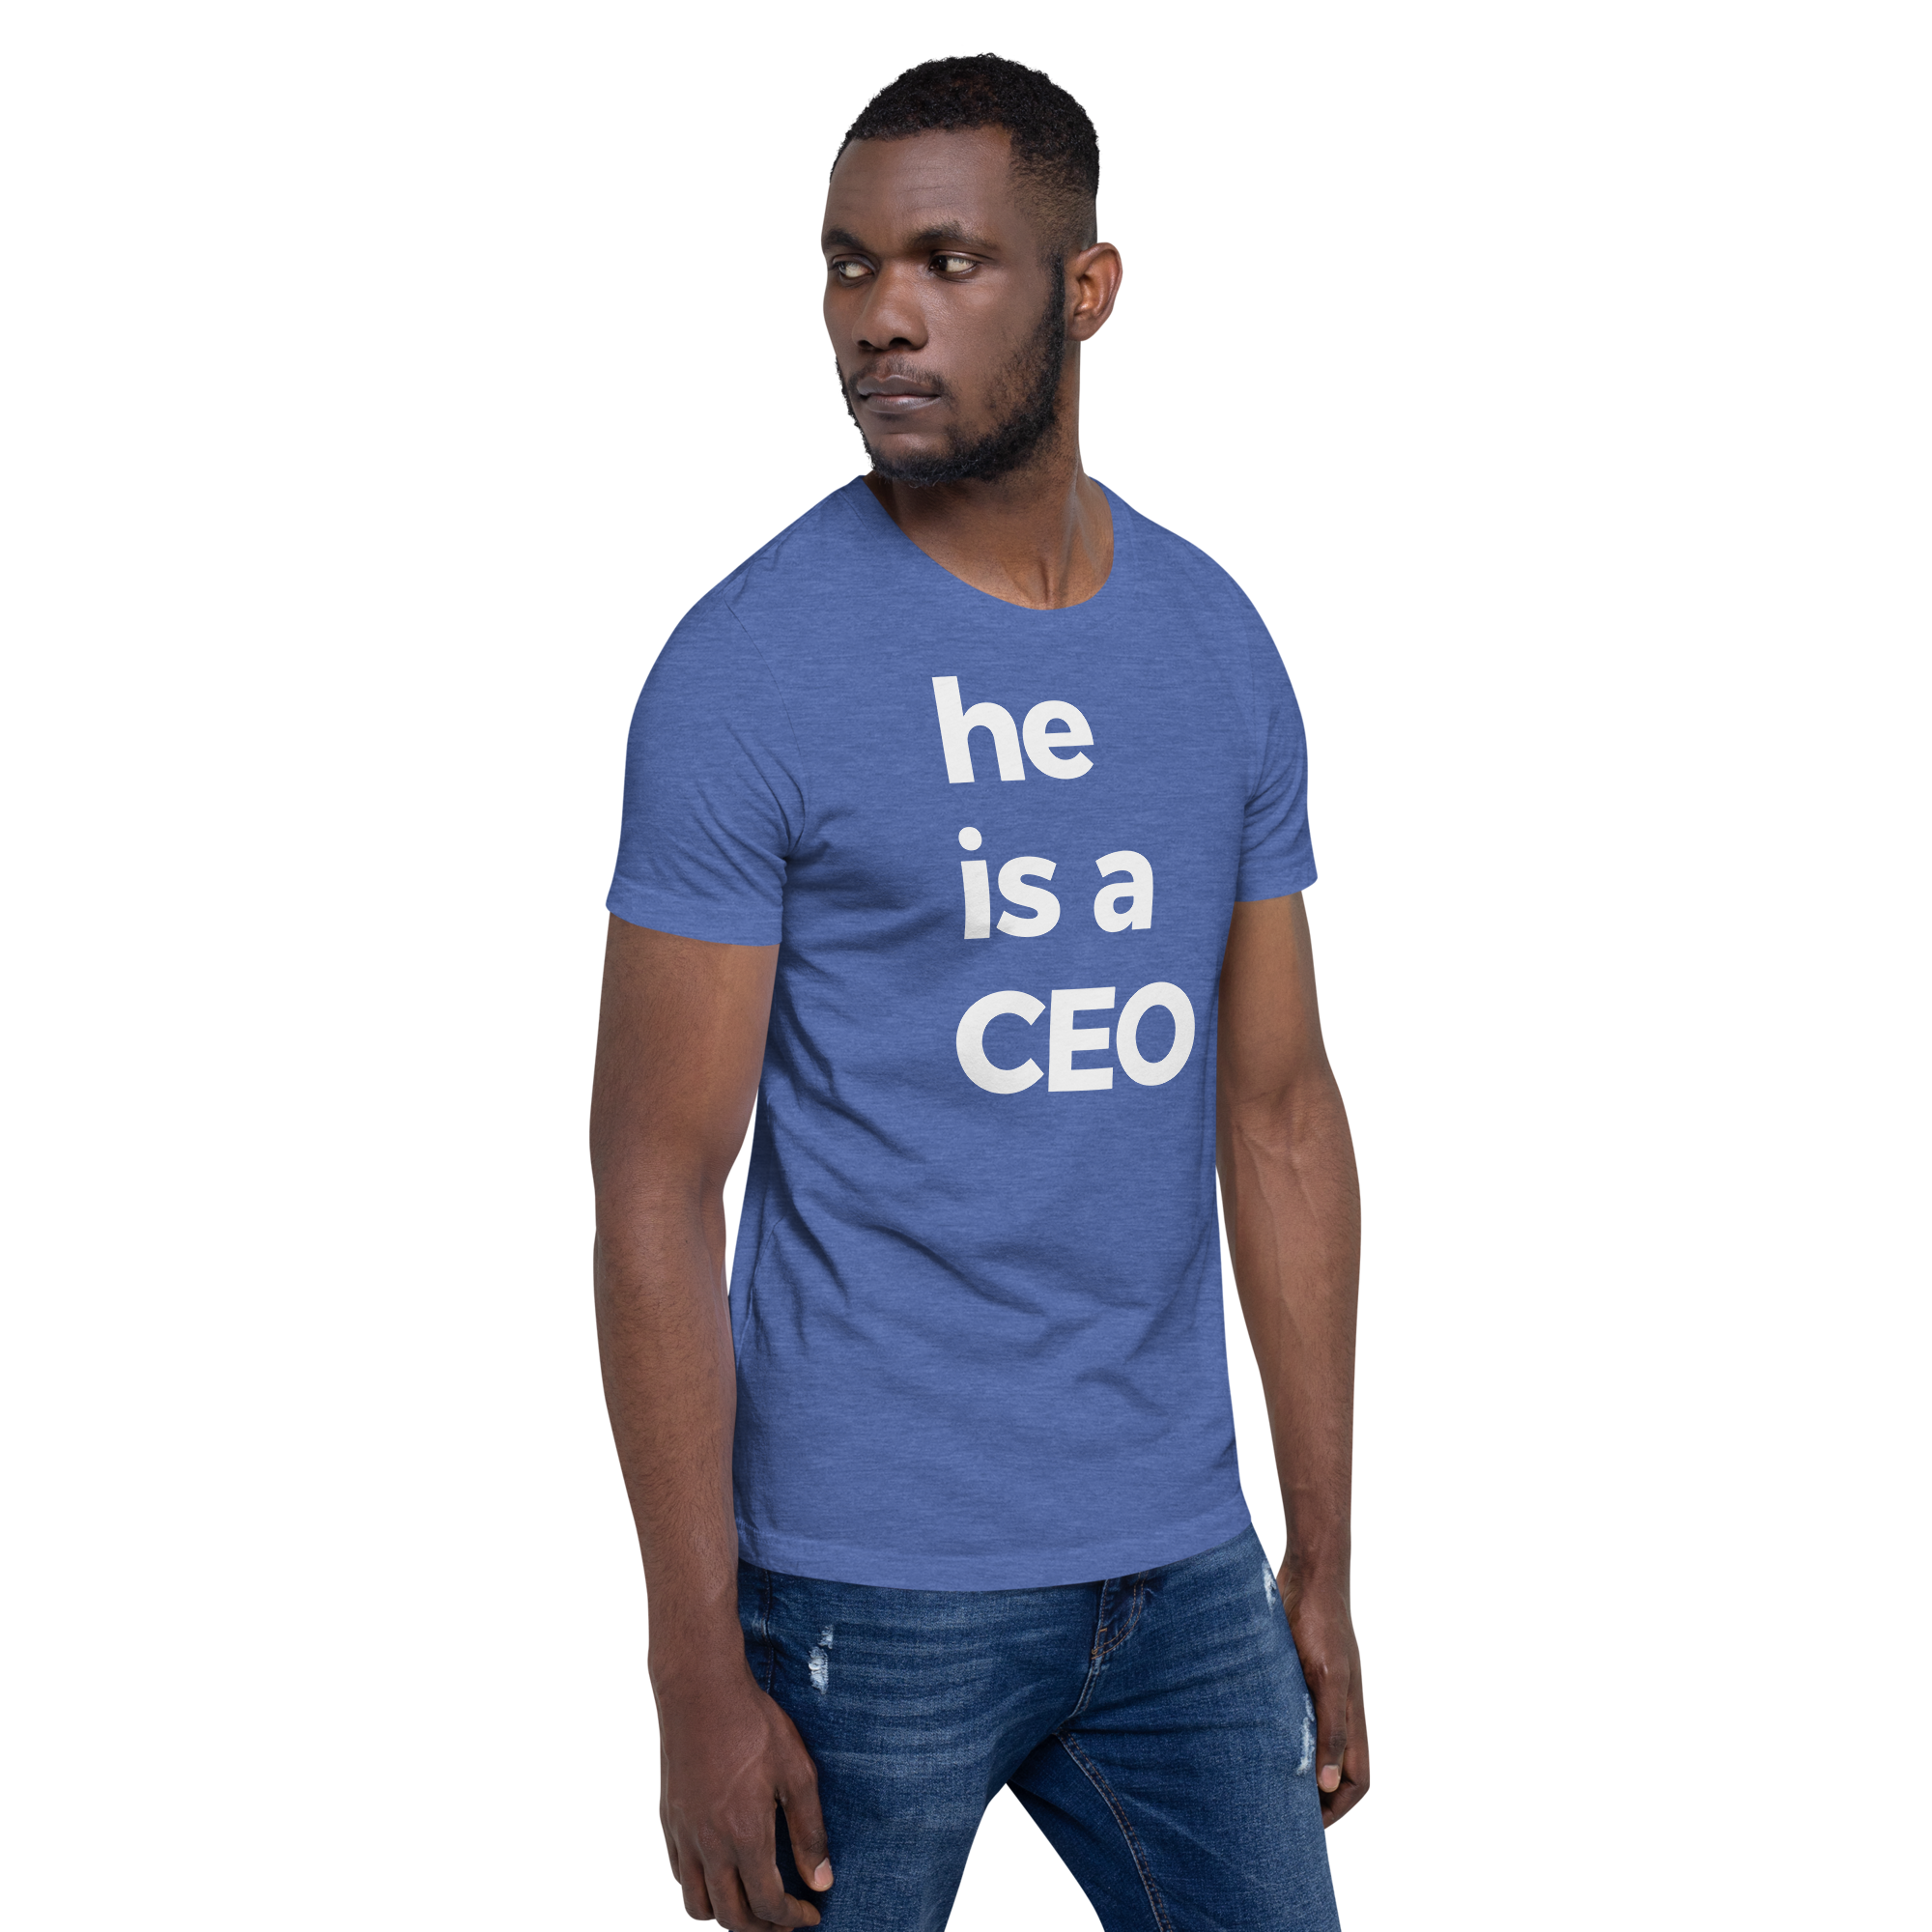 he is a ceo tee